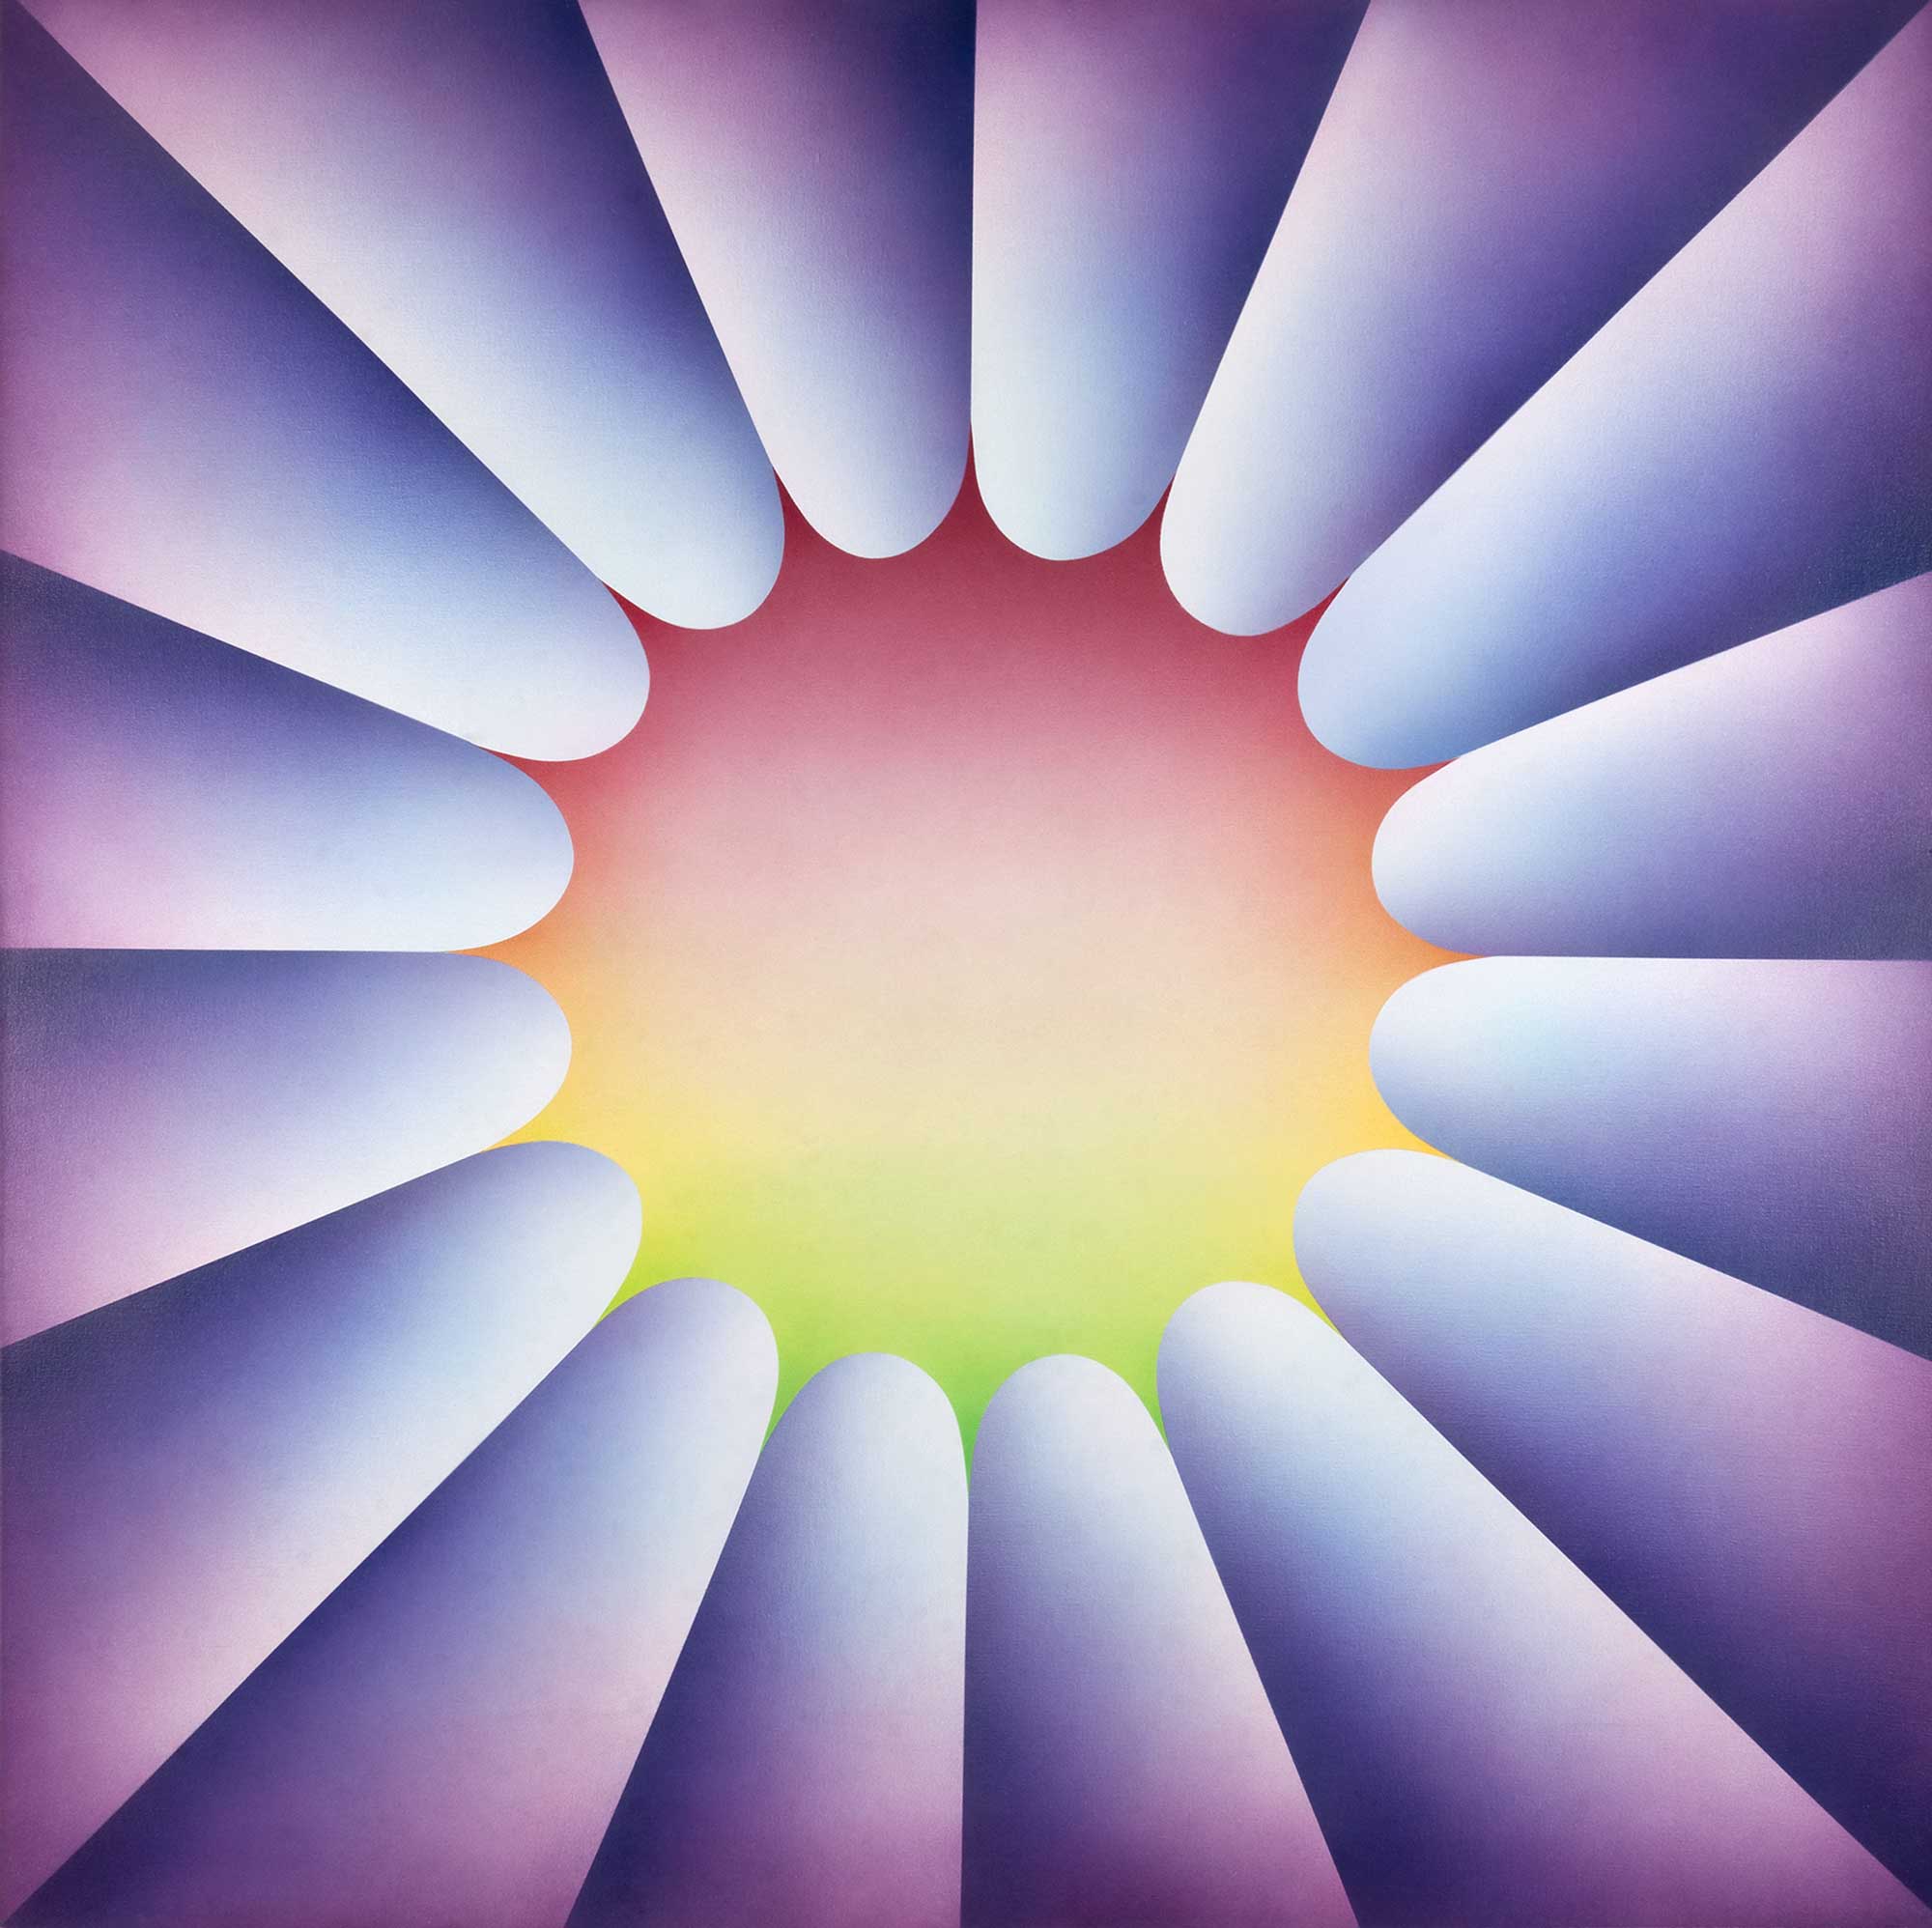 Judy Chicago, Through the Flower 2, 1973. Sprayed acrylic on canvas 60 x 60 in Collection Diane Gelon. © Judy Chicago/Artists Rights Society (ARS), New York. Photo © Donald Woodman/Artists Rights Society (ARS), New York